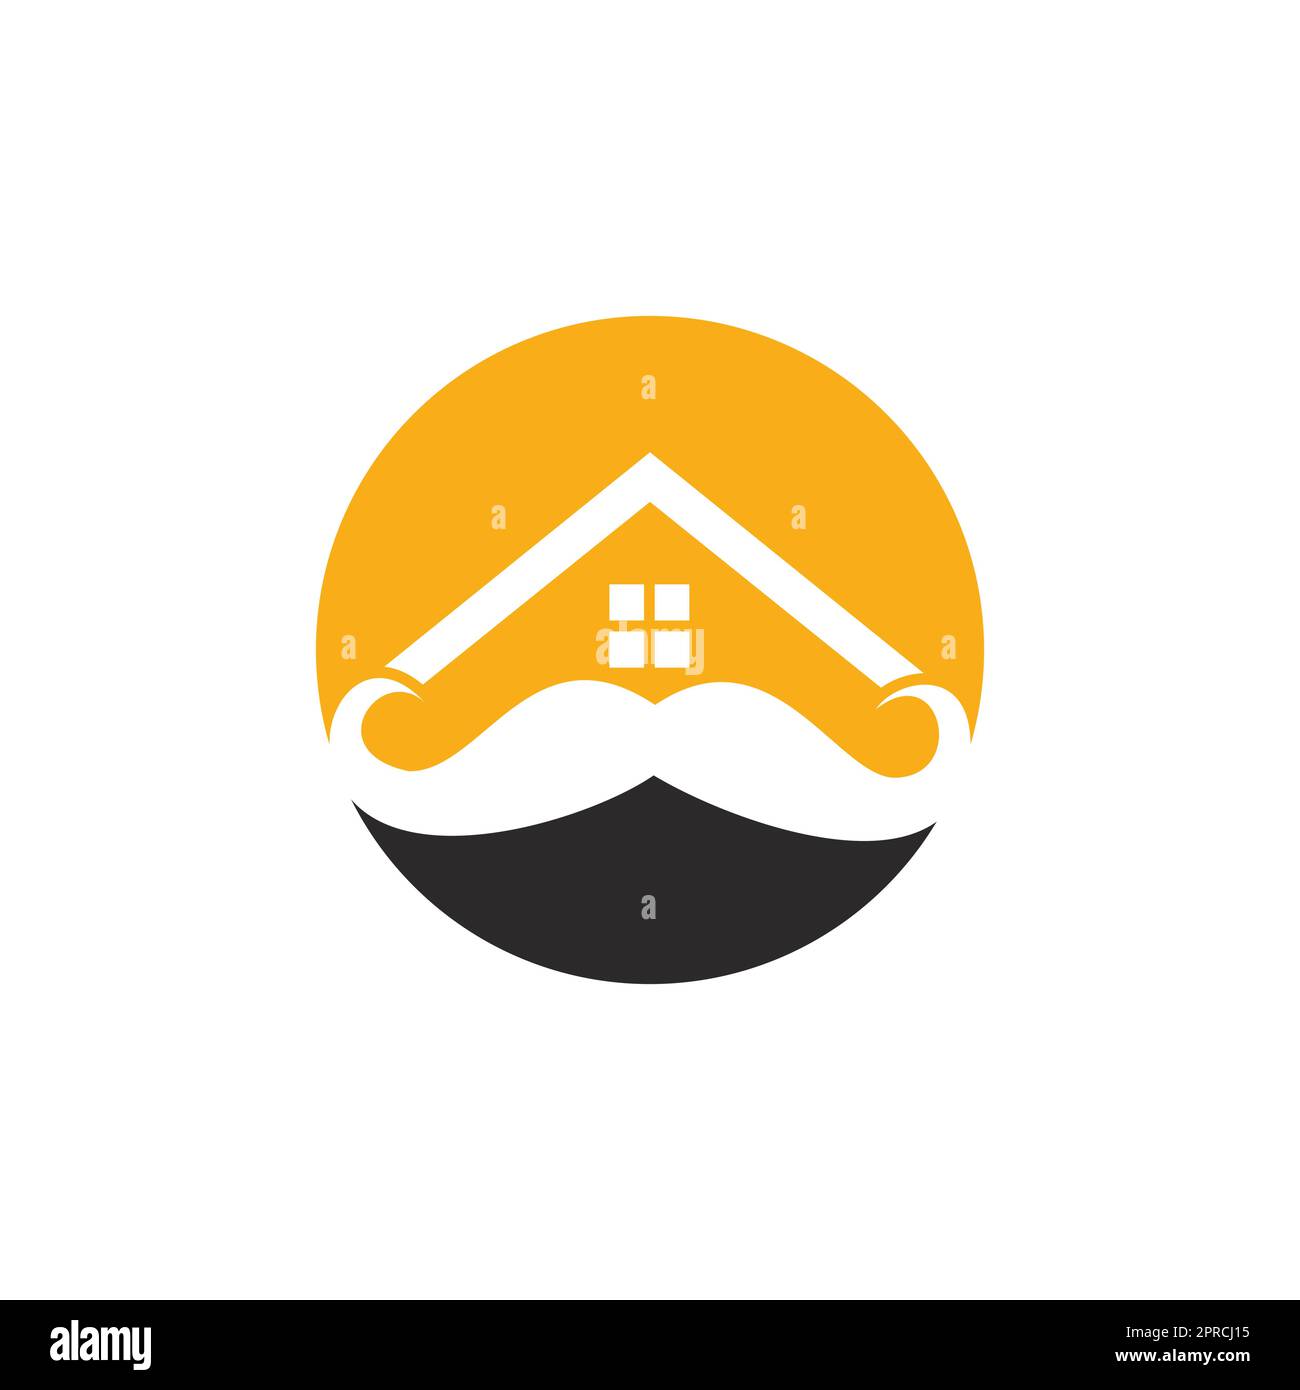 Premium Vector  Illustration of a cute spatula with a mustached face